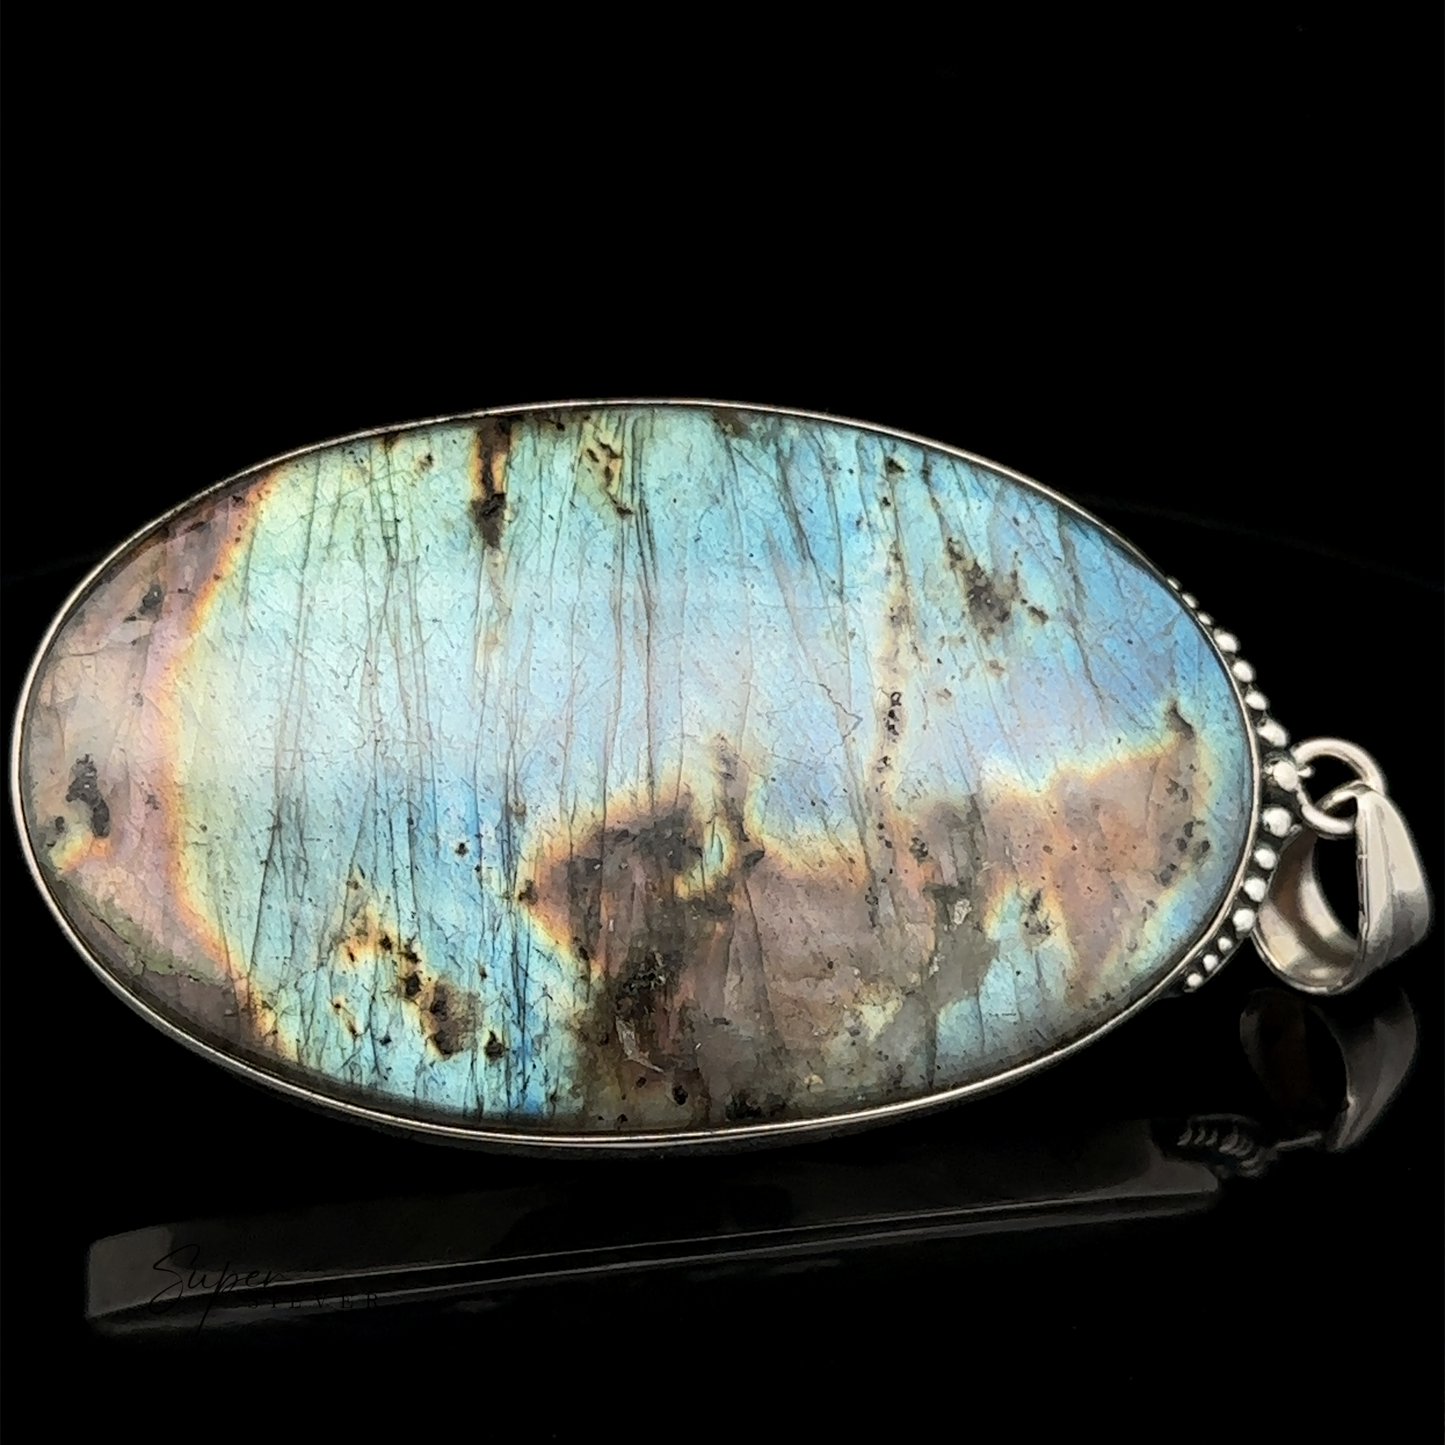 
                  
                    Oval-shaped labradorite pendant with a metallic sheen in shades of green, blue, and brown, set in sterling silver and displayed against a black background. This XL Statement Oval Labradorite Pendant is perfect for those who appreciate statement pendants as part of their jewelry collection.
                  
                